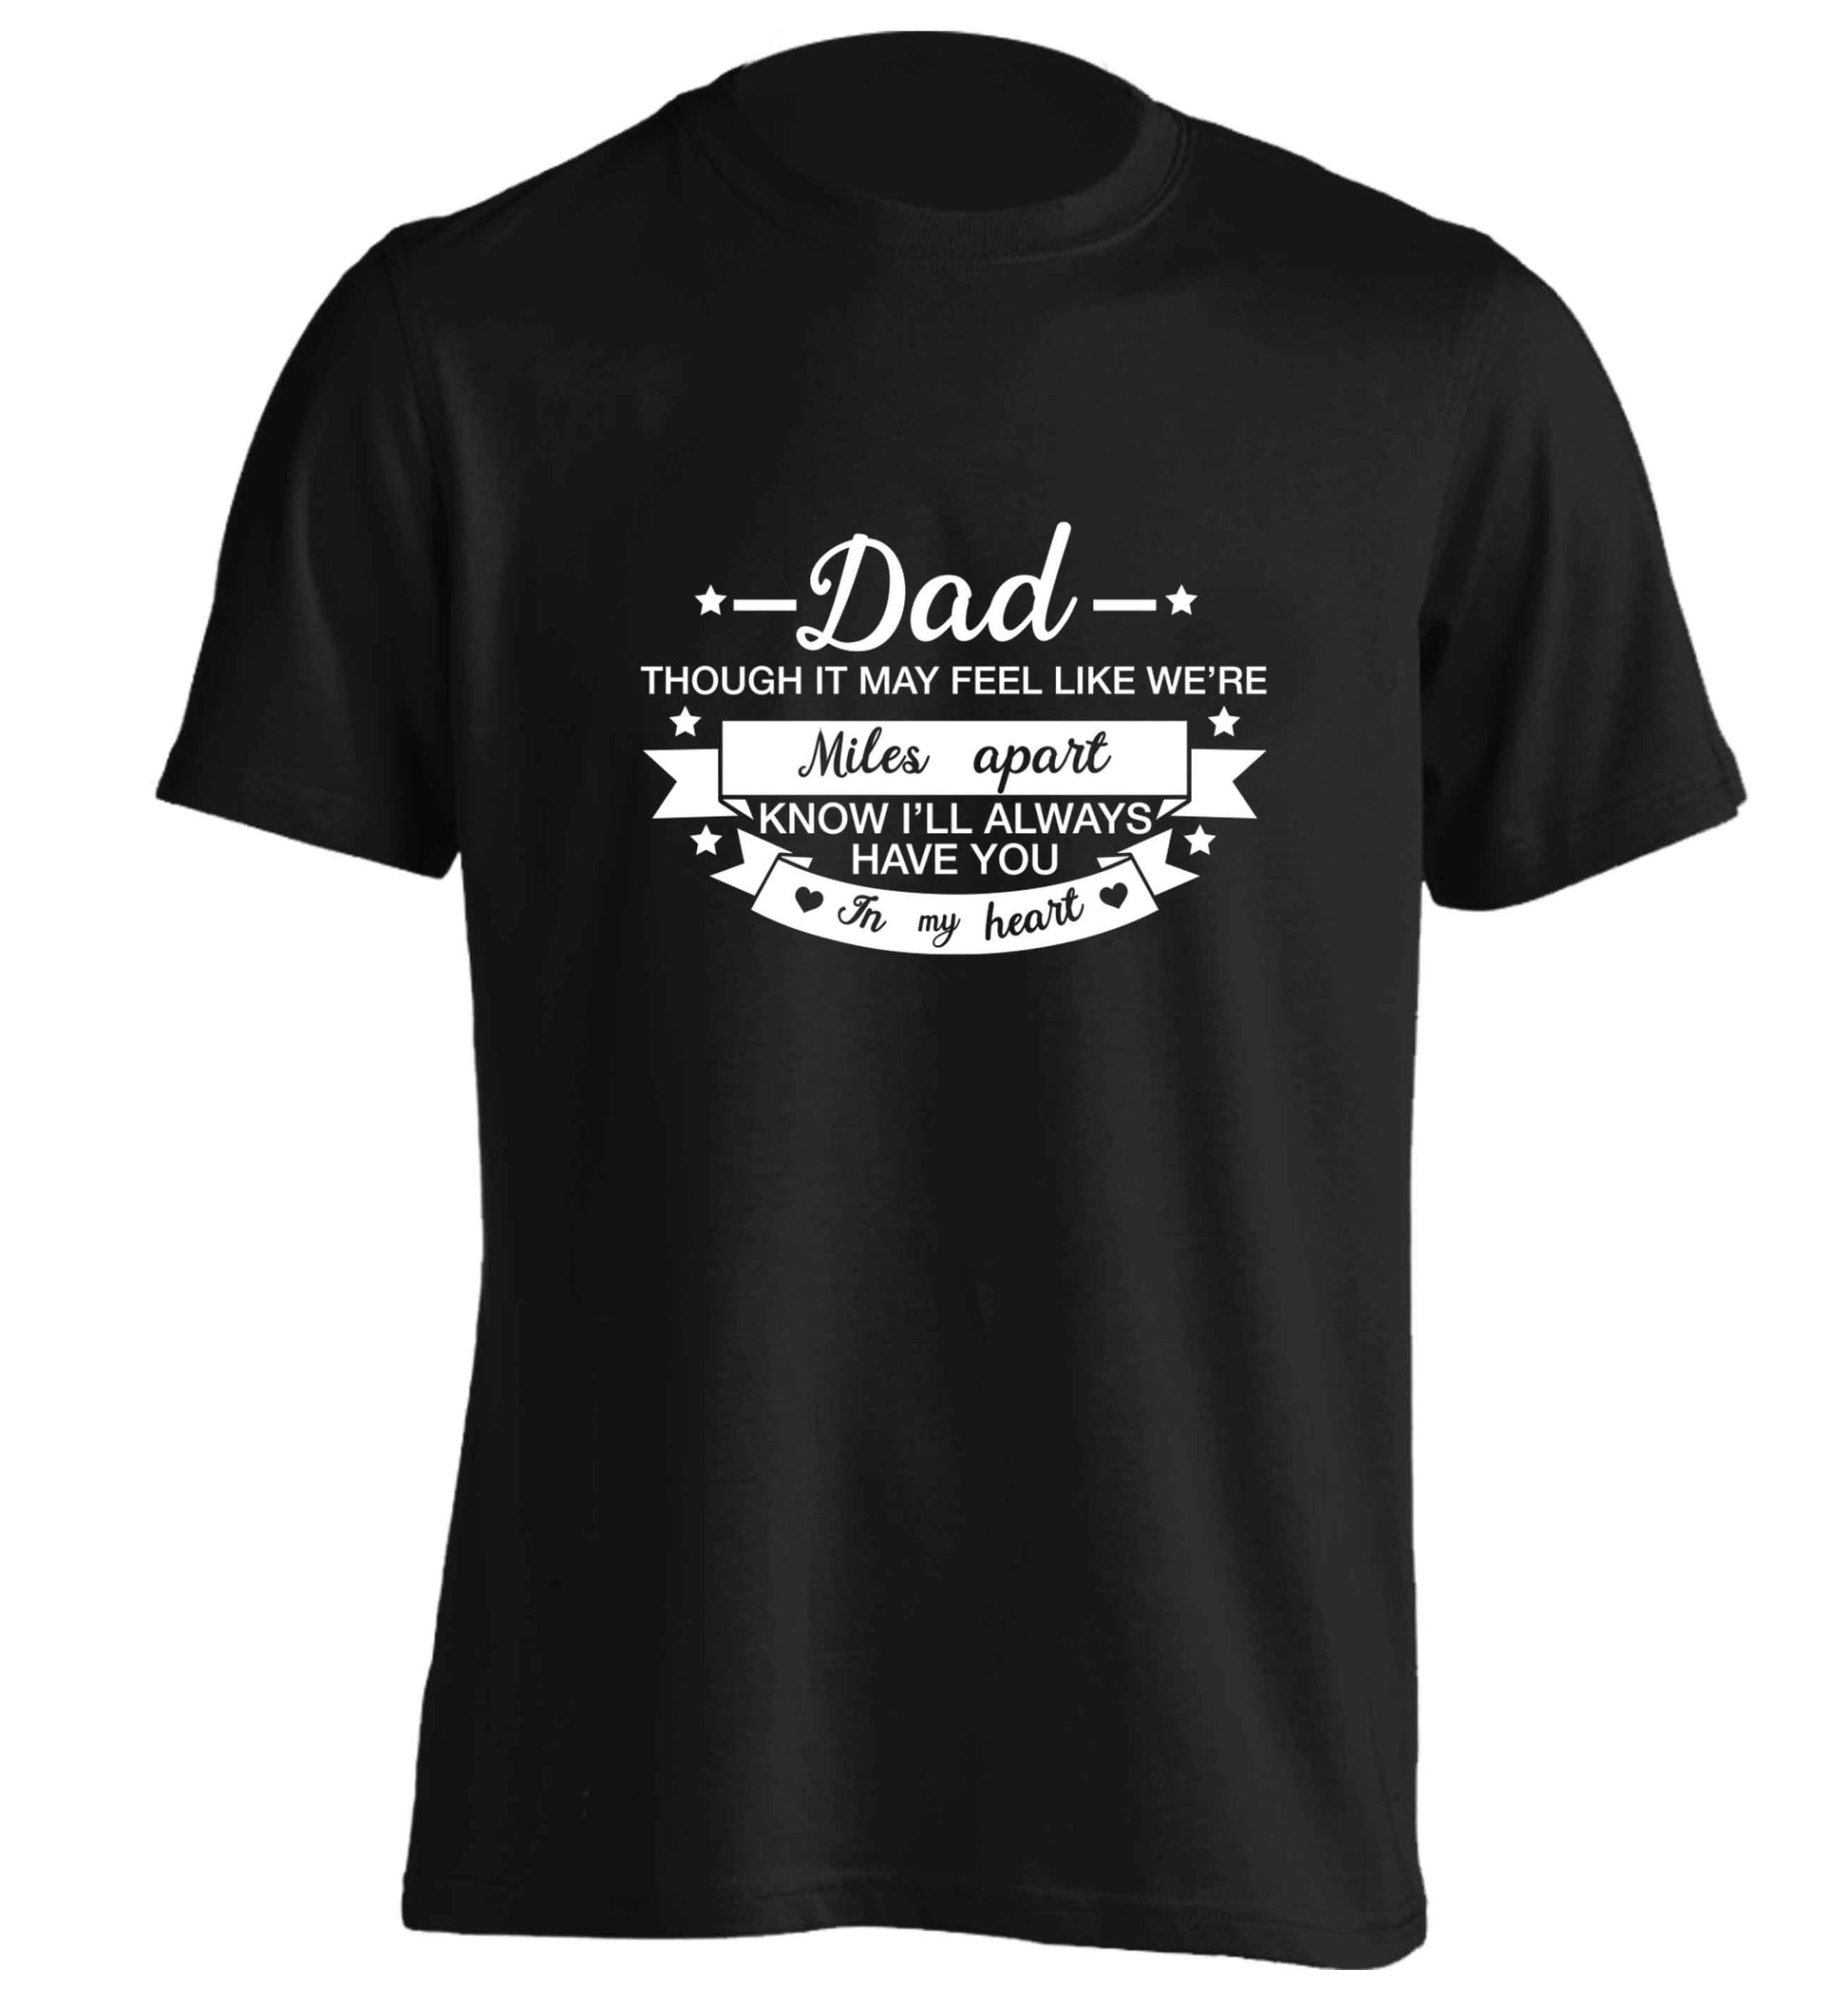 Dad though it may feel like we're miles apart know I'll always have you in my heart adults unisex black Tshirt 2XL